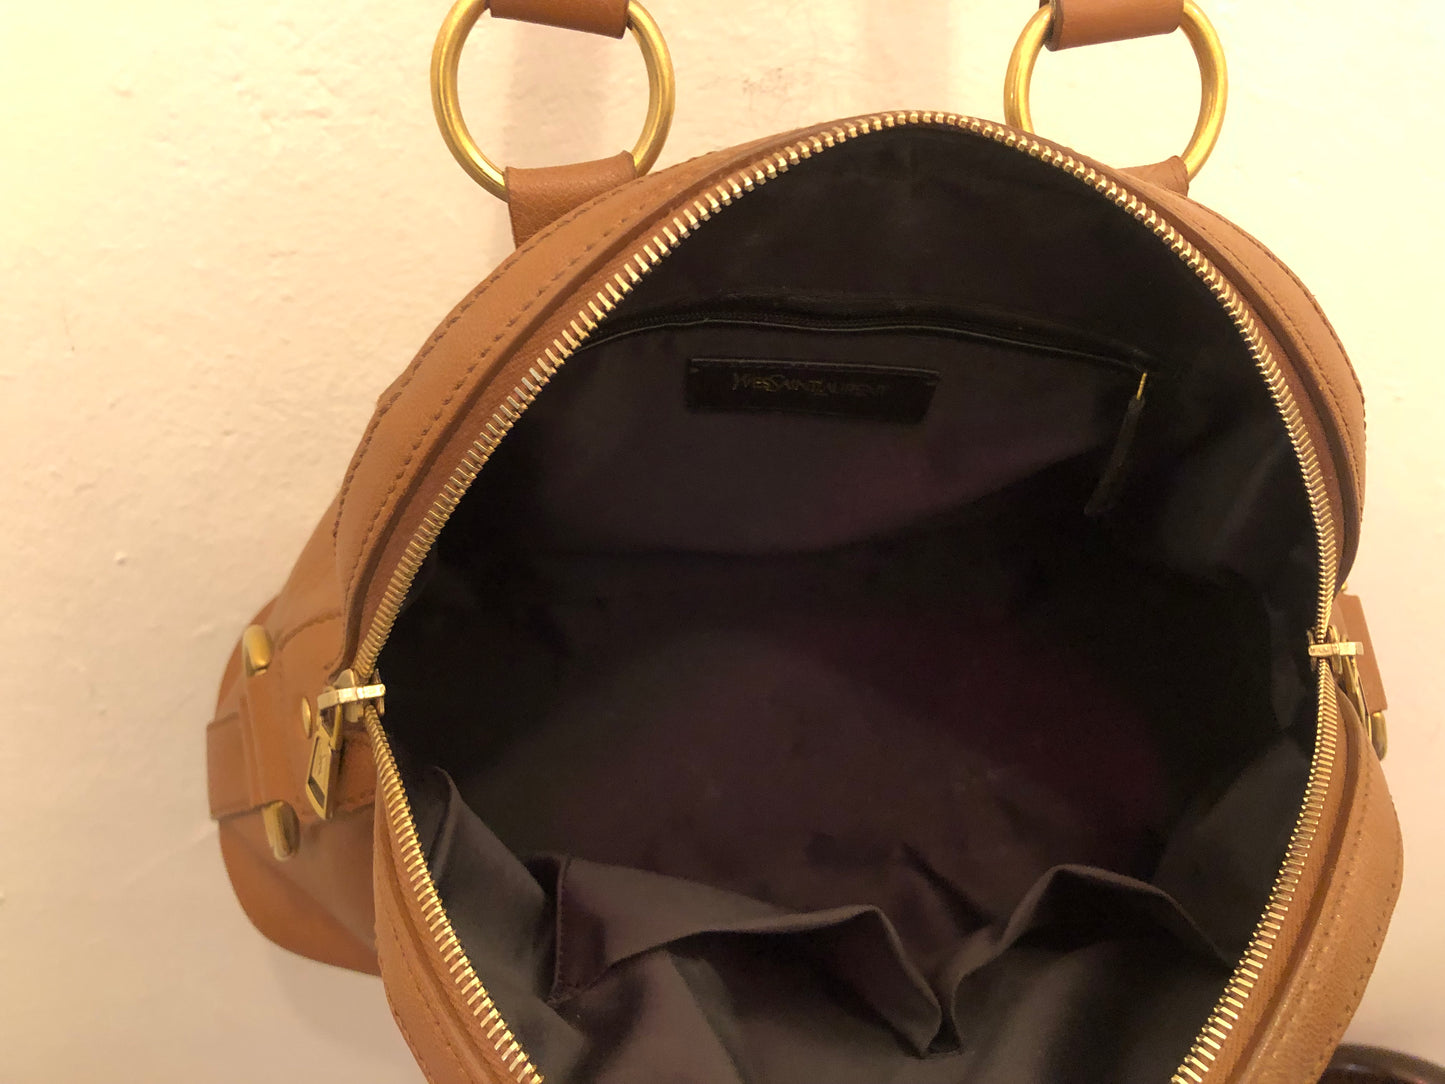 YSL ‘Muse’ Brown Leather Bag